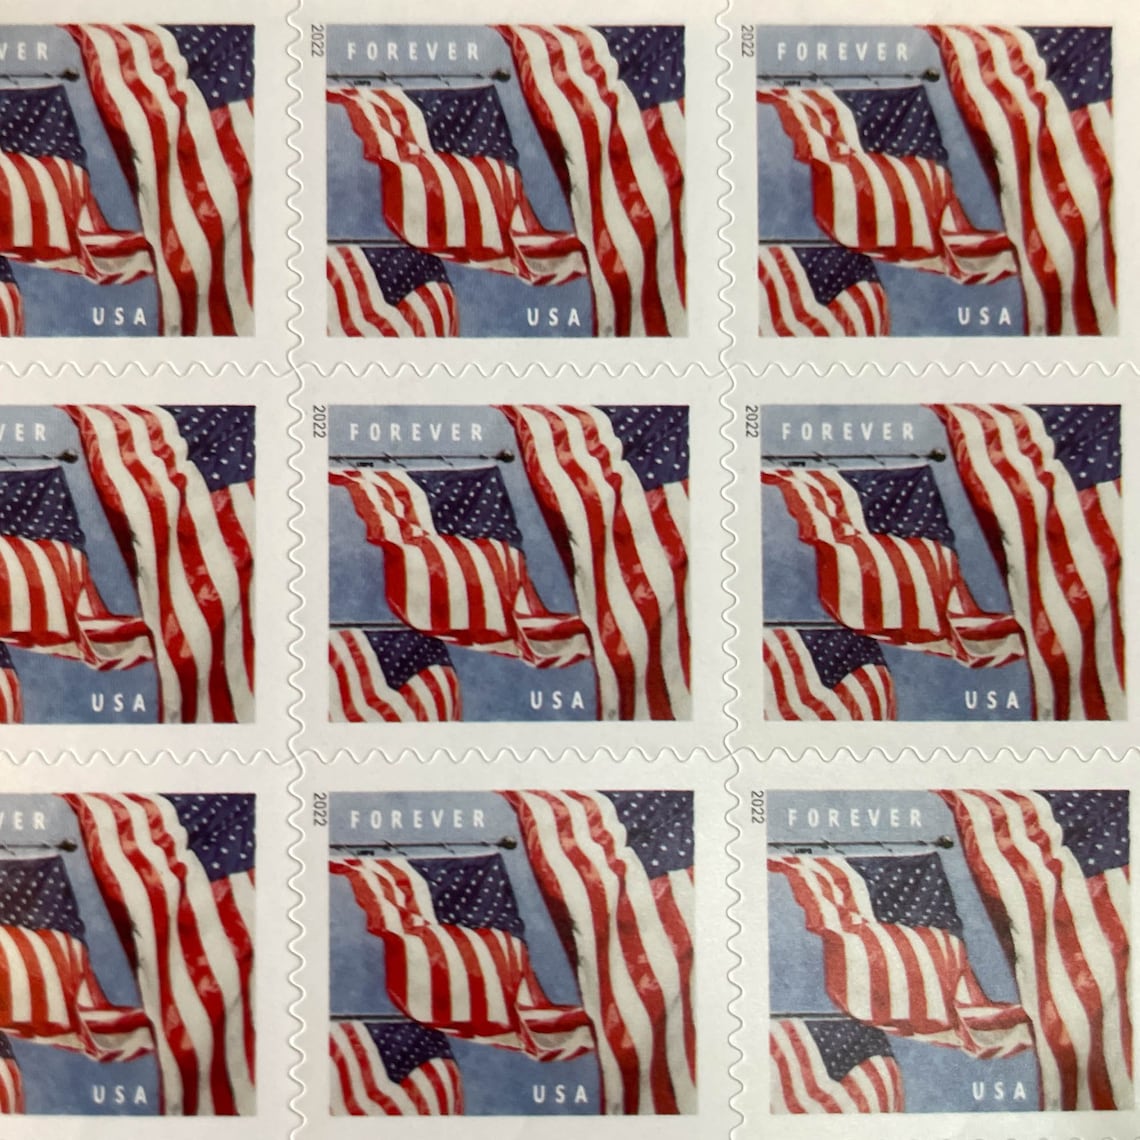 Real 2022 American Forever Flag Stamps 100pcs Etsy